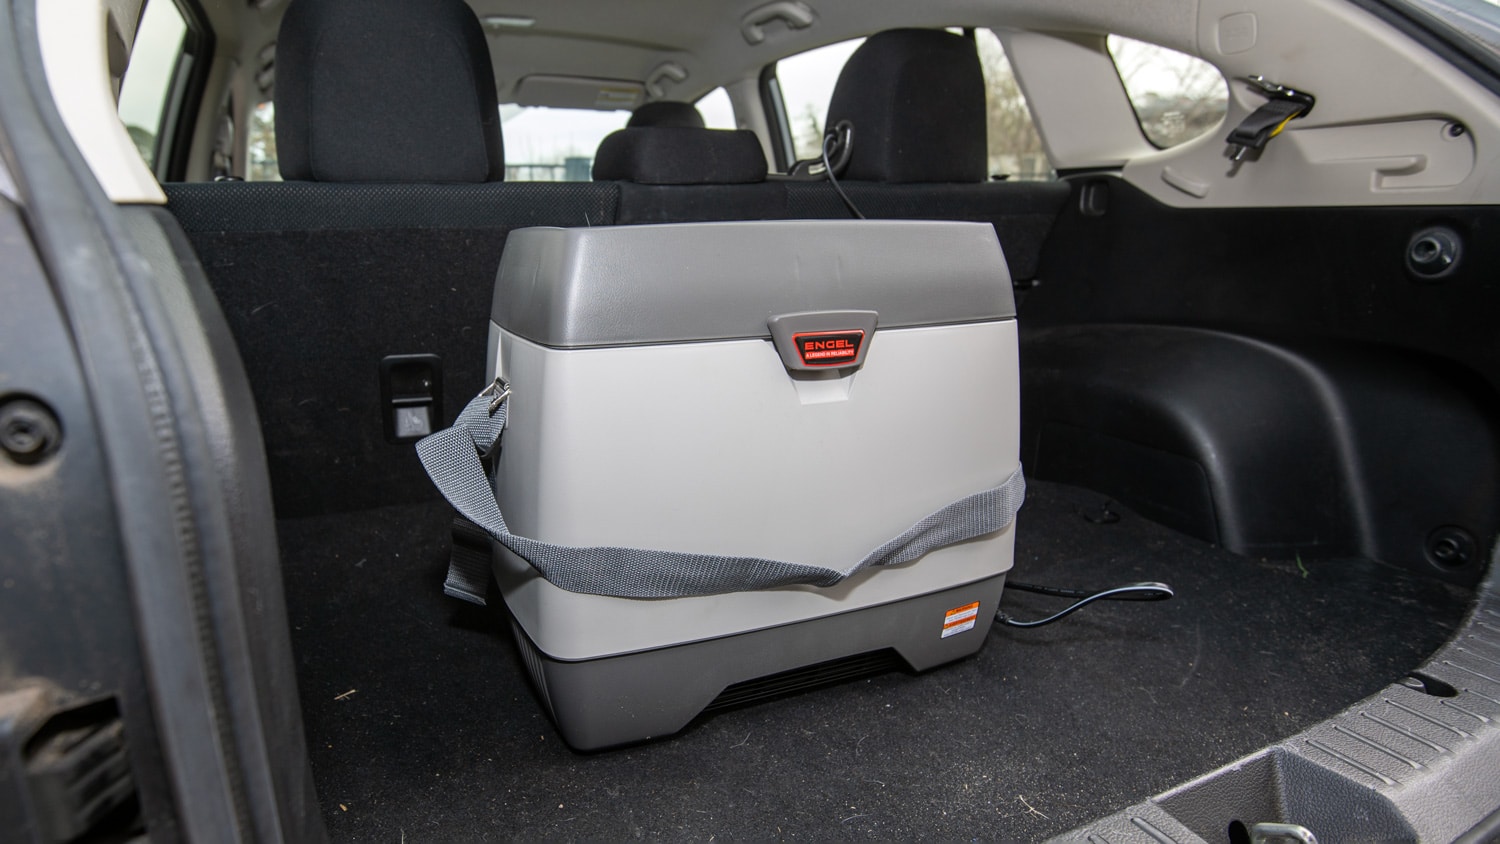 An Engel 14-quart 12-volt cooler sits in the back of a vehicle